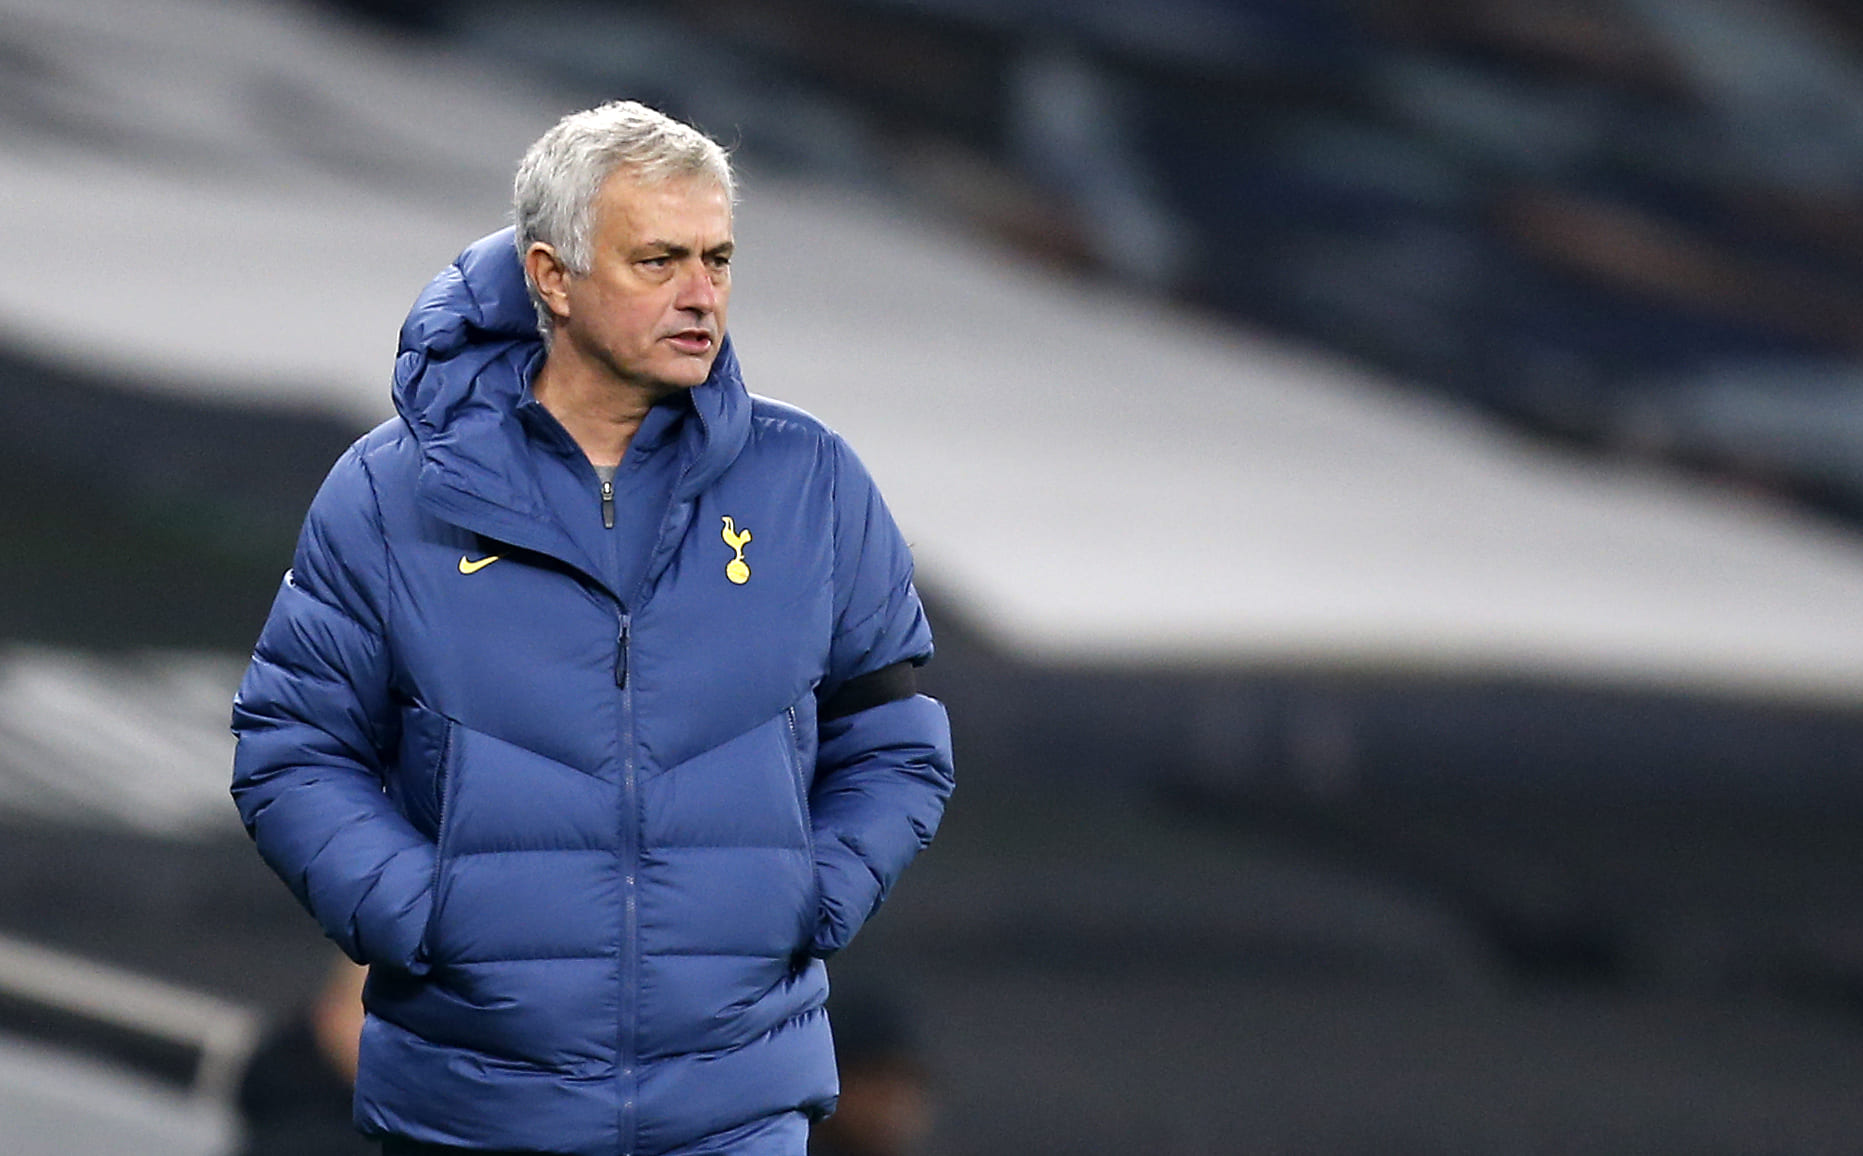 Jose Mourinho says Tottenham Hotspur should not fear any side going into the round of 32 in the Europa League. (GETTY Images)